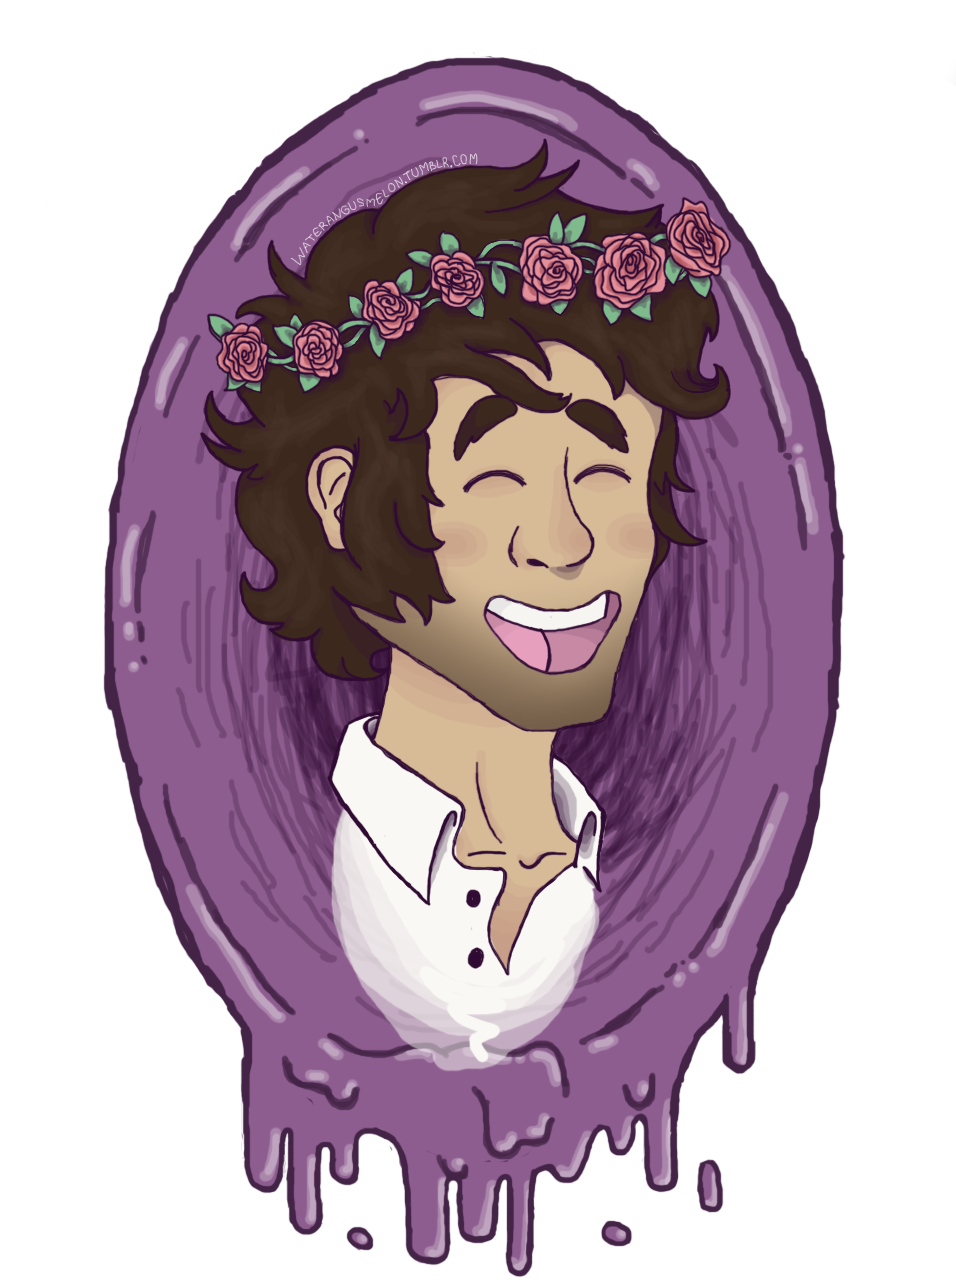 welcometonightvale wtnv Night Vale welcome to Cecil Palmer carlos the scientist podcast